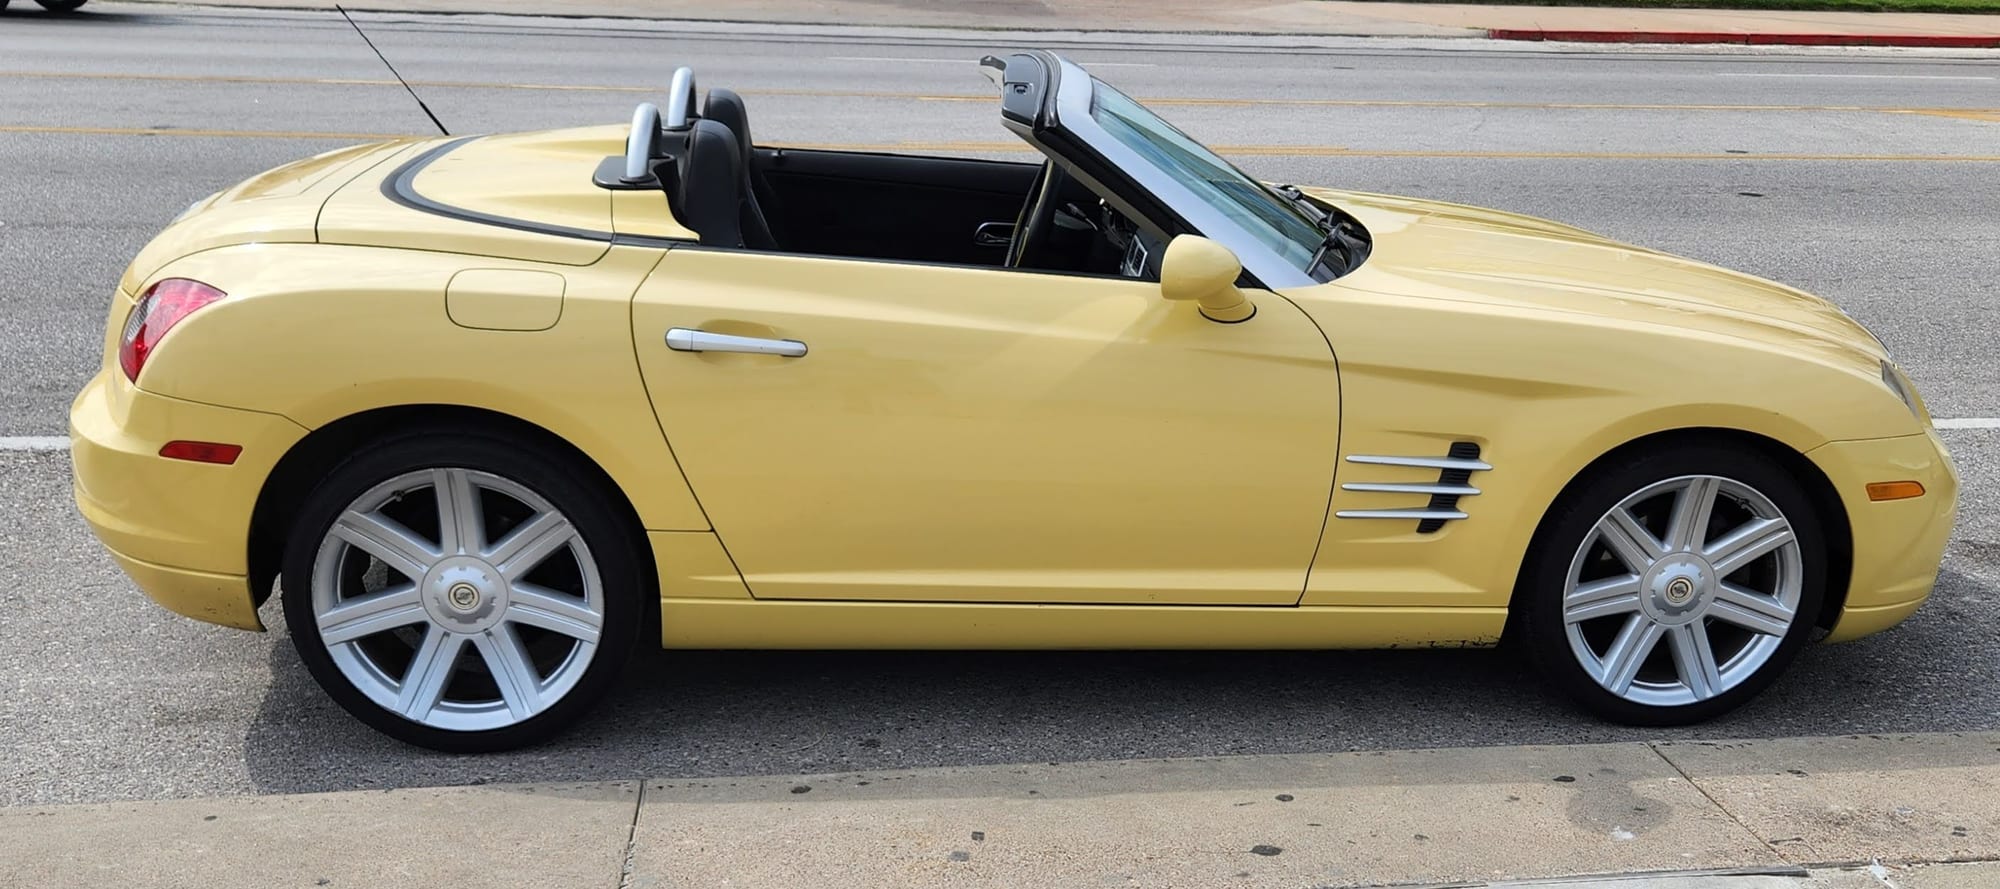 2005 Chrysler Crossfire - 05 Crossfire Roadster Limited - Yellow - Used - Galveston, TX 77550, United States